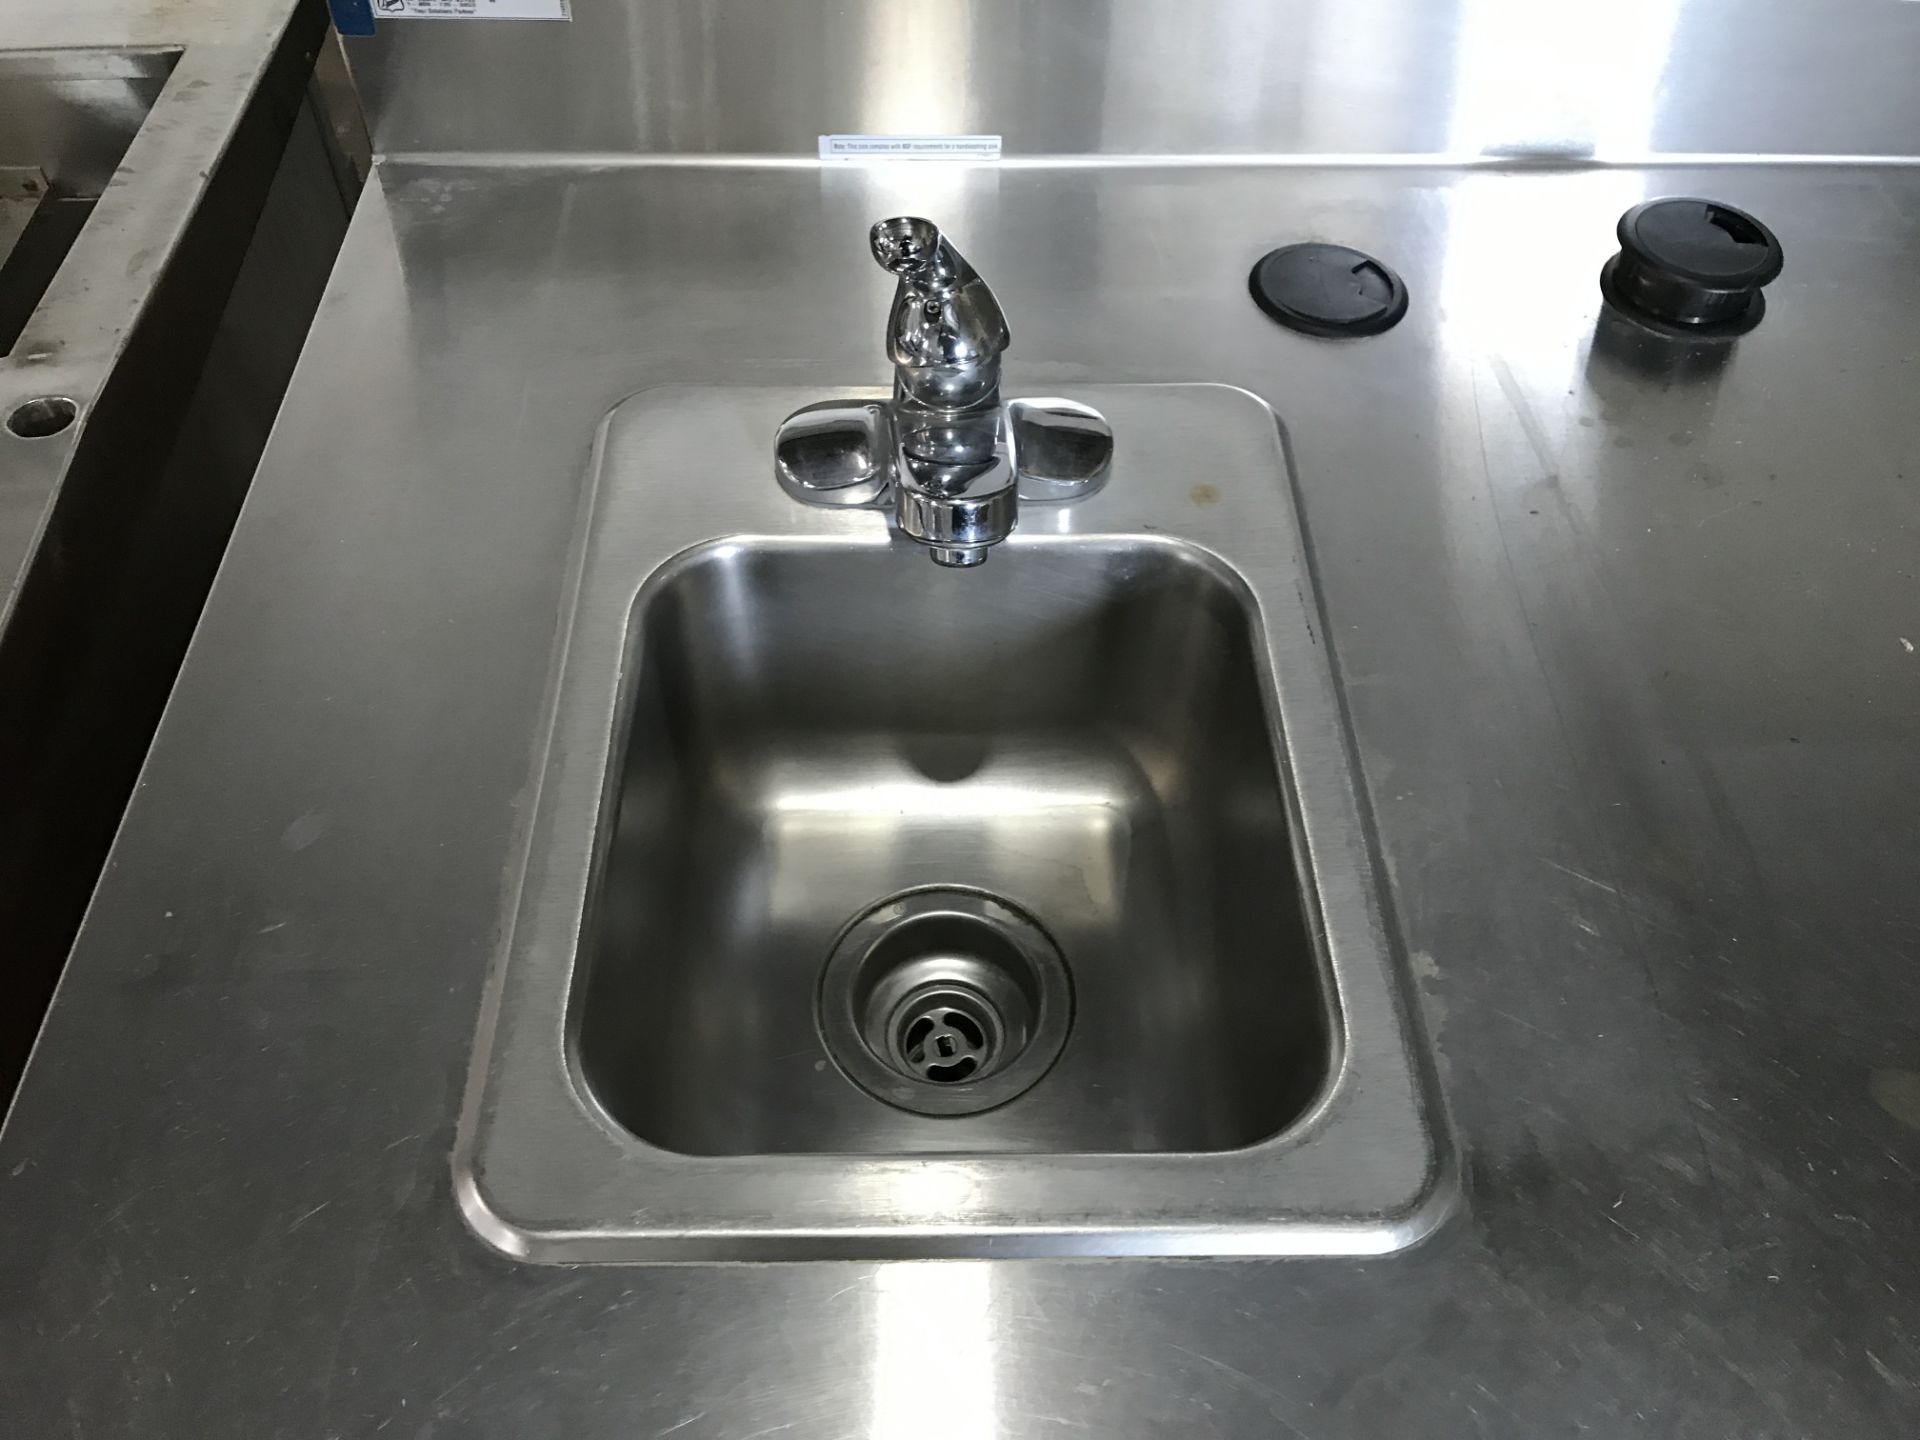 Sink and stainless steel table combo - Image 2 of 2